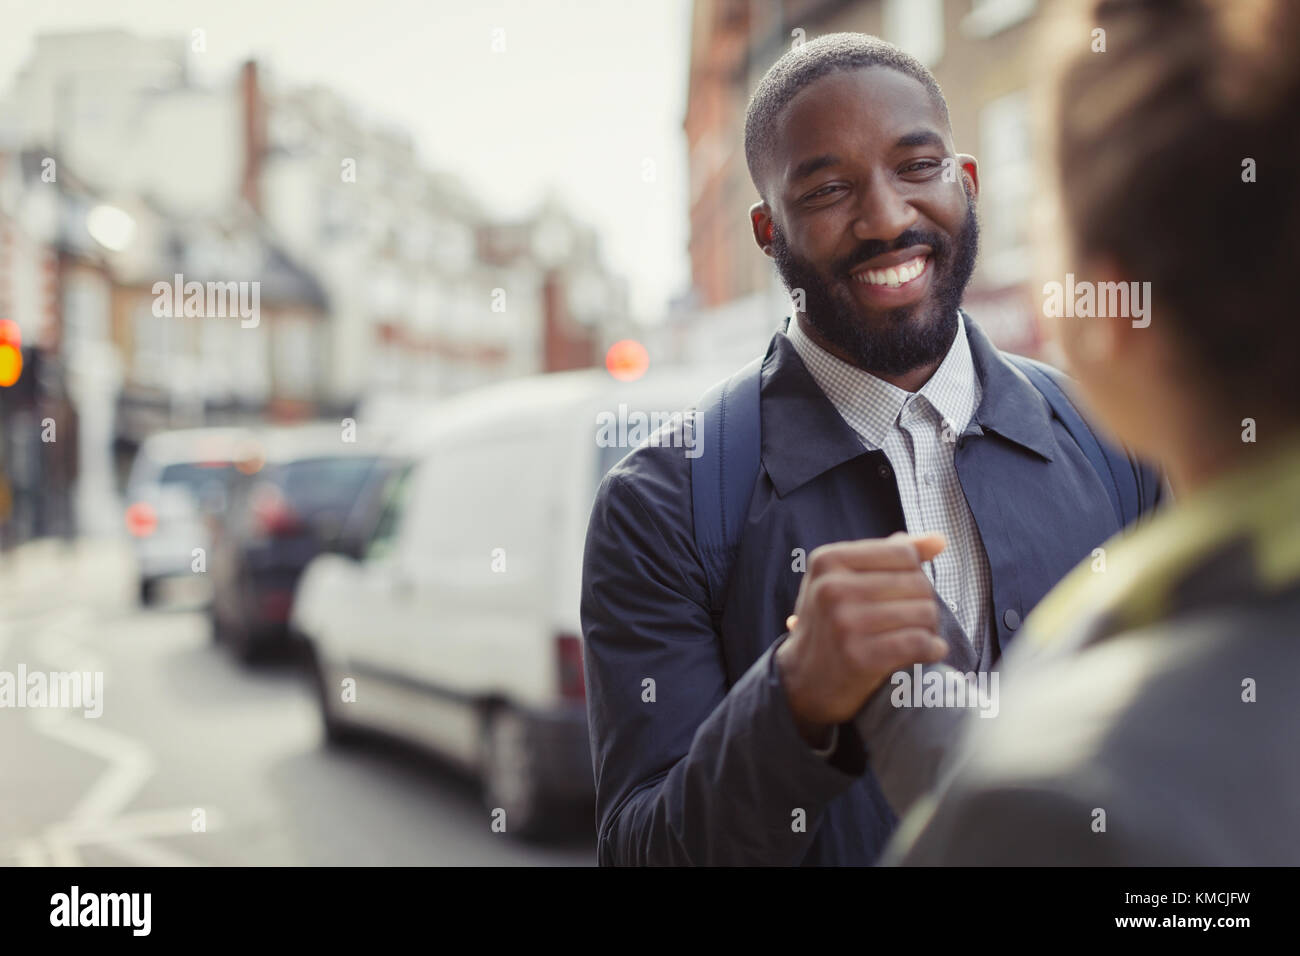 Smiling businessman shaking hands with colleague on urban street Stock Photo